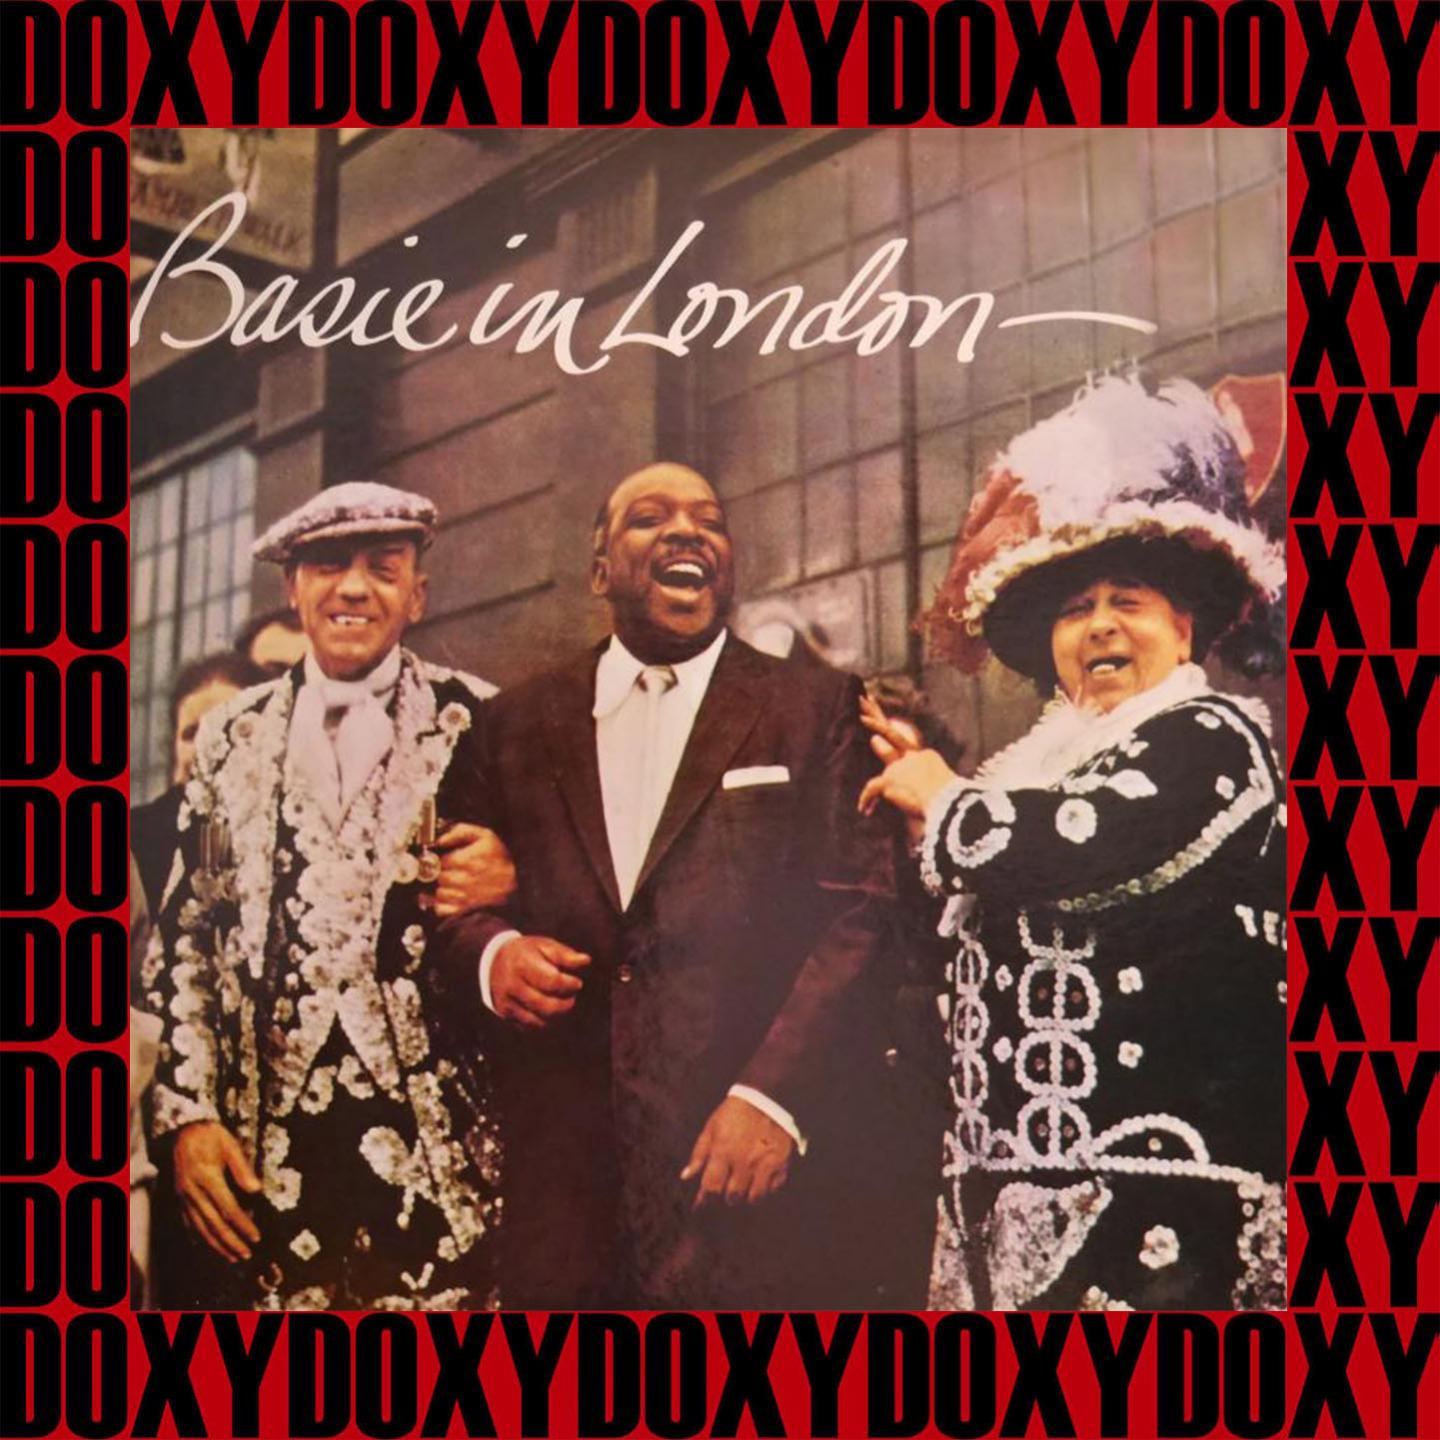 Basie In London, 1956 (Remastered Version) (Doxy Collection)